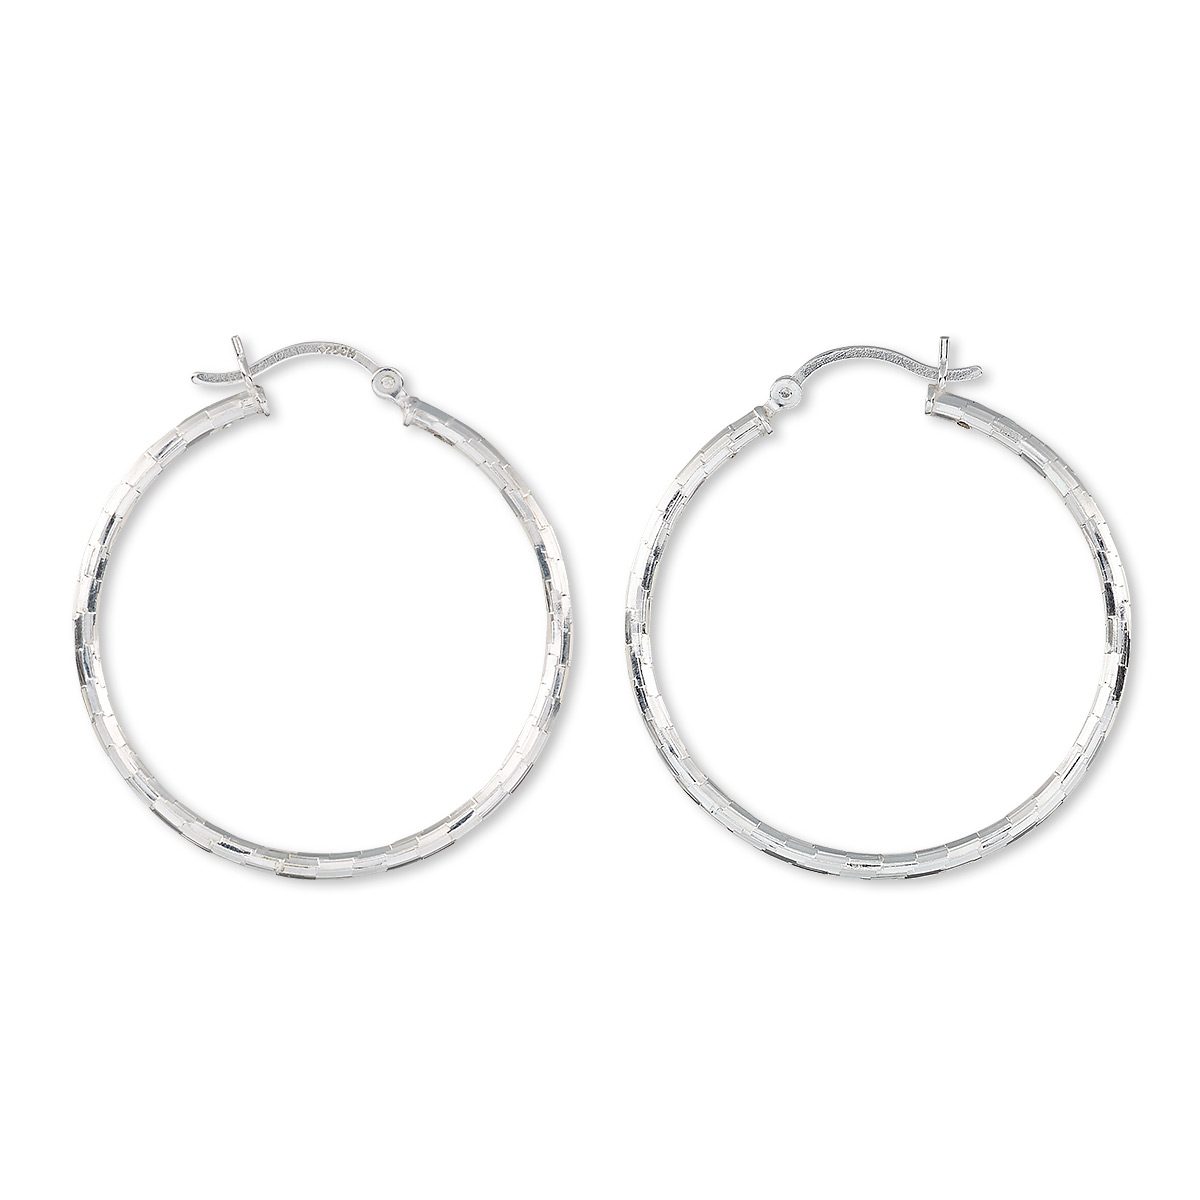 Earring, sterling silver, 35mm textured round hoop with latch-back ...